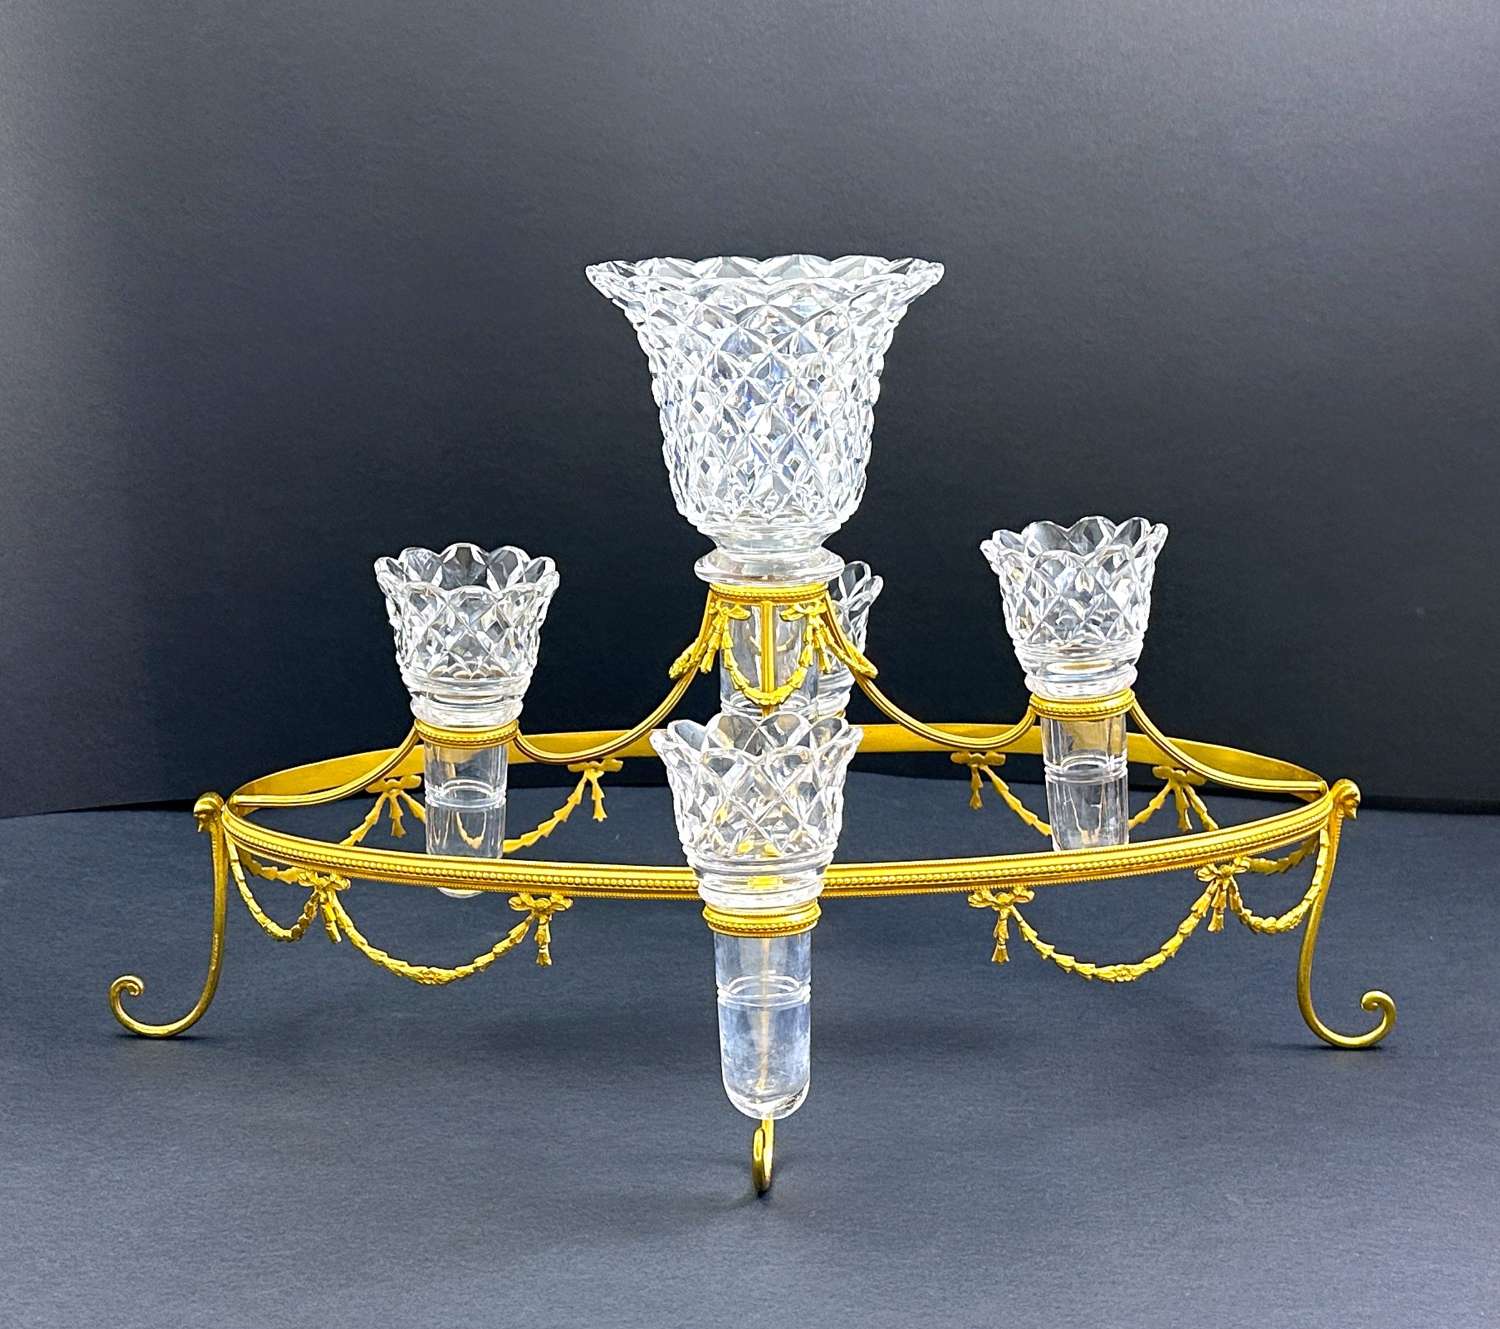 A Stunning Antique Cut Crystal Glass Posy Vase Centrepiece.